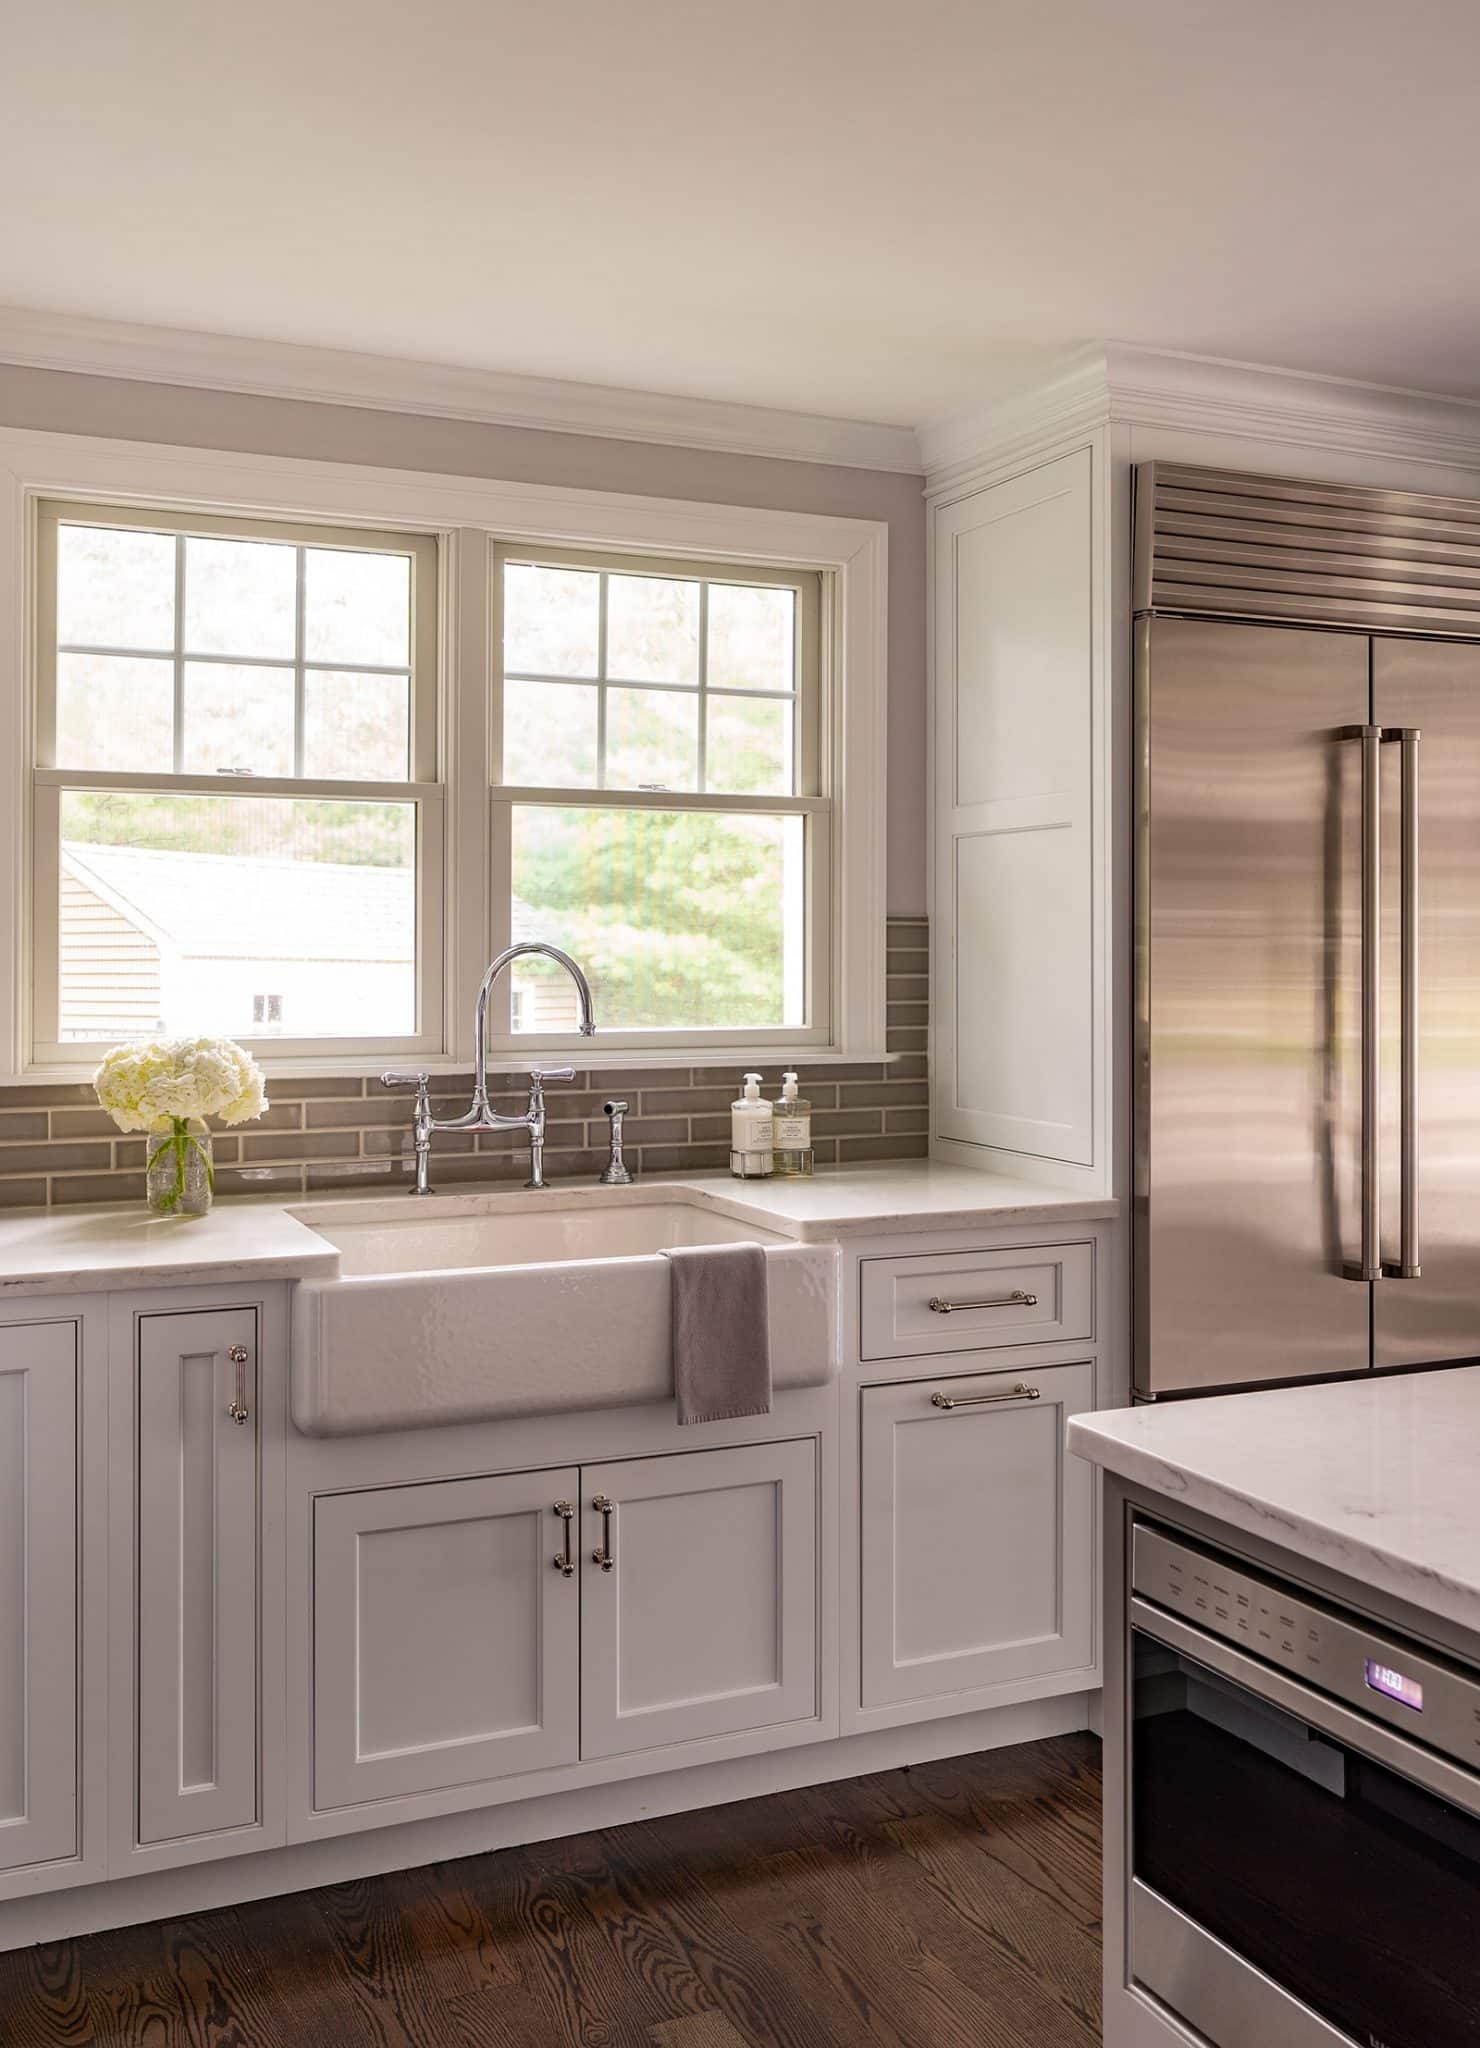 North Shore Tranquility Interiors Middleton MA Kitchen